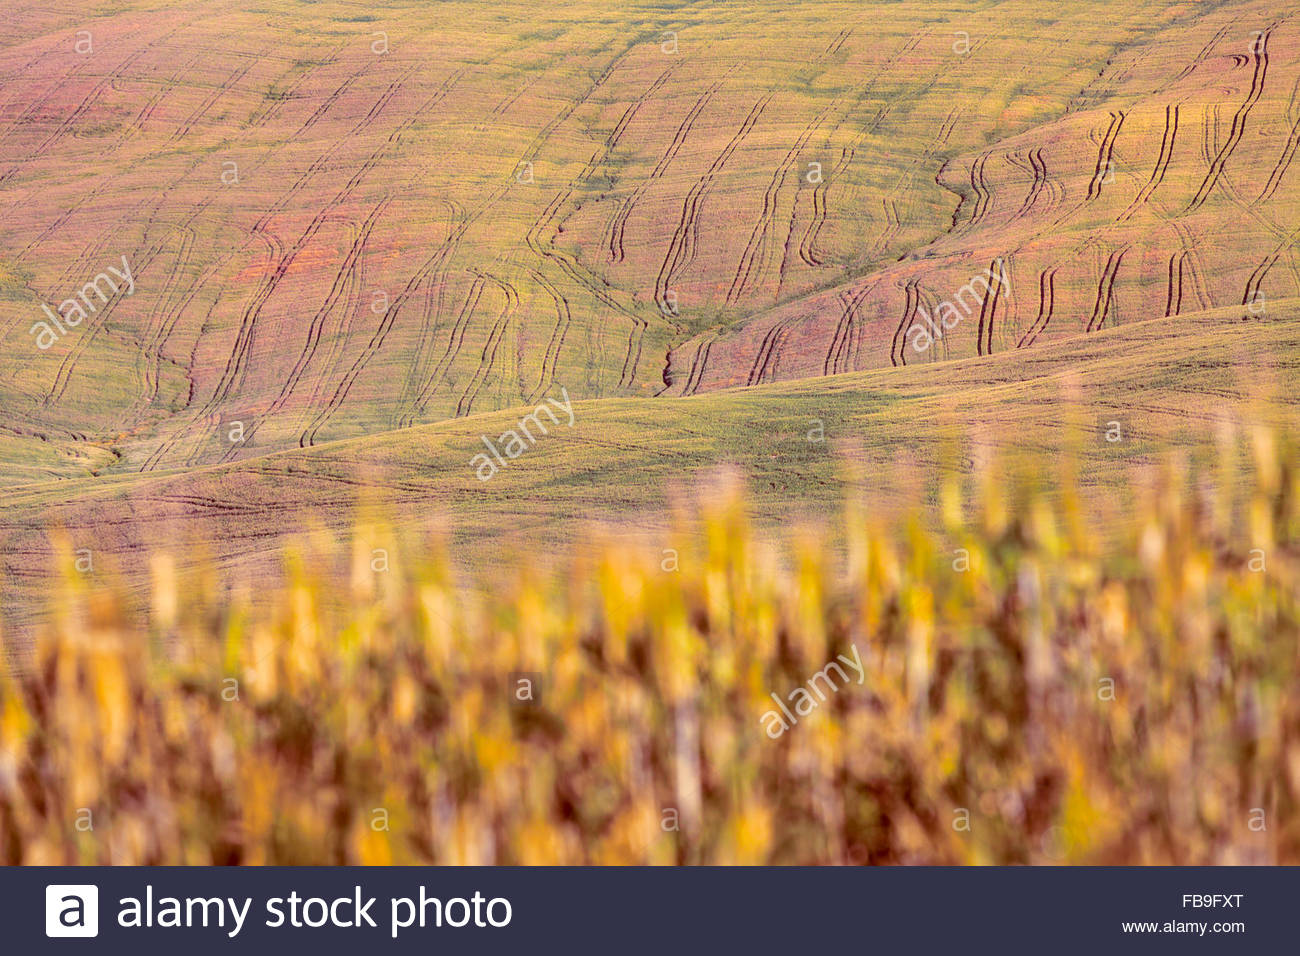 Colorful Tuscan Grain Field Background Stock Photo